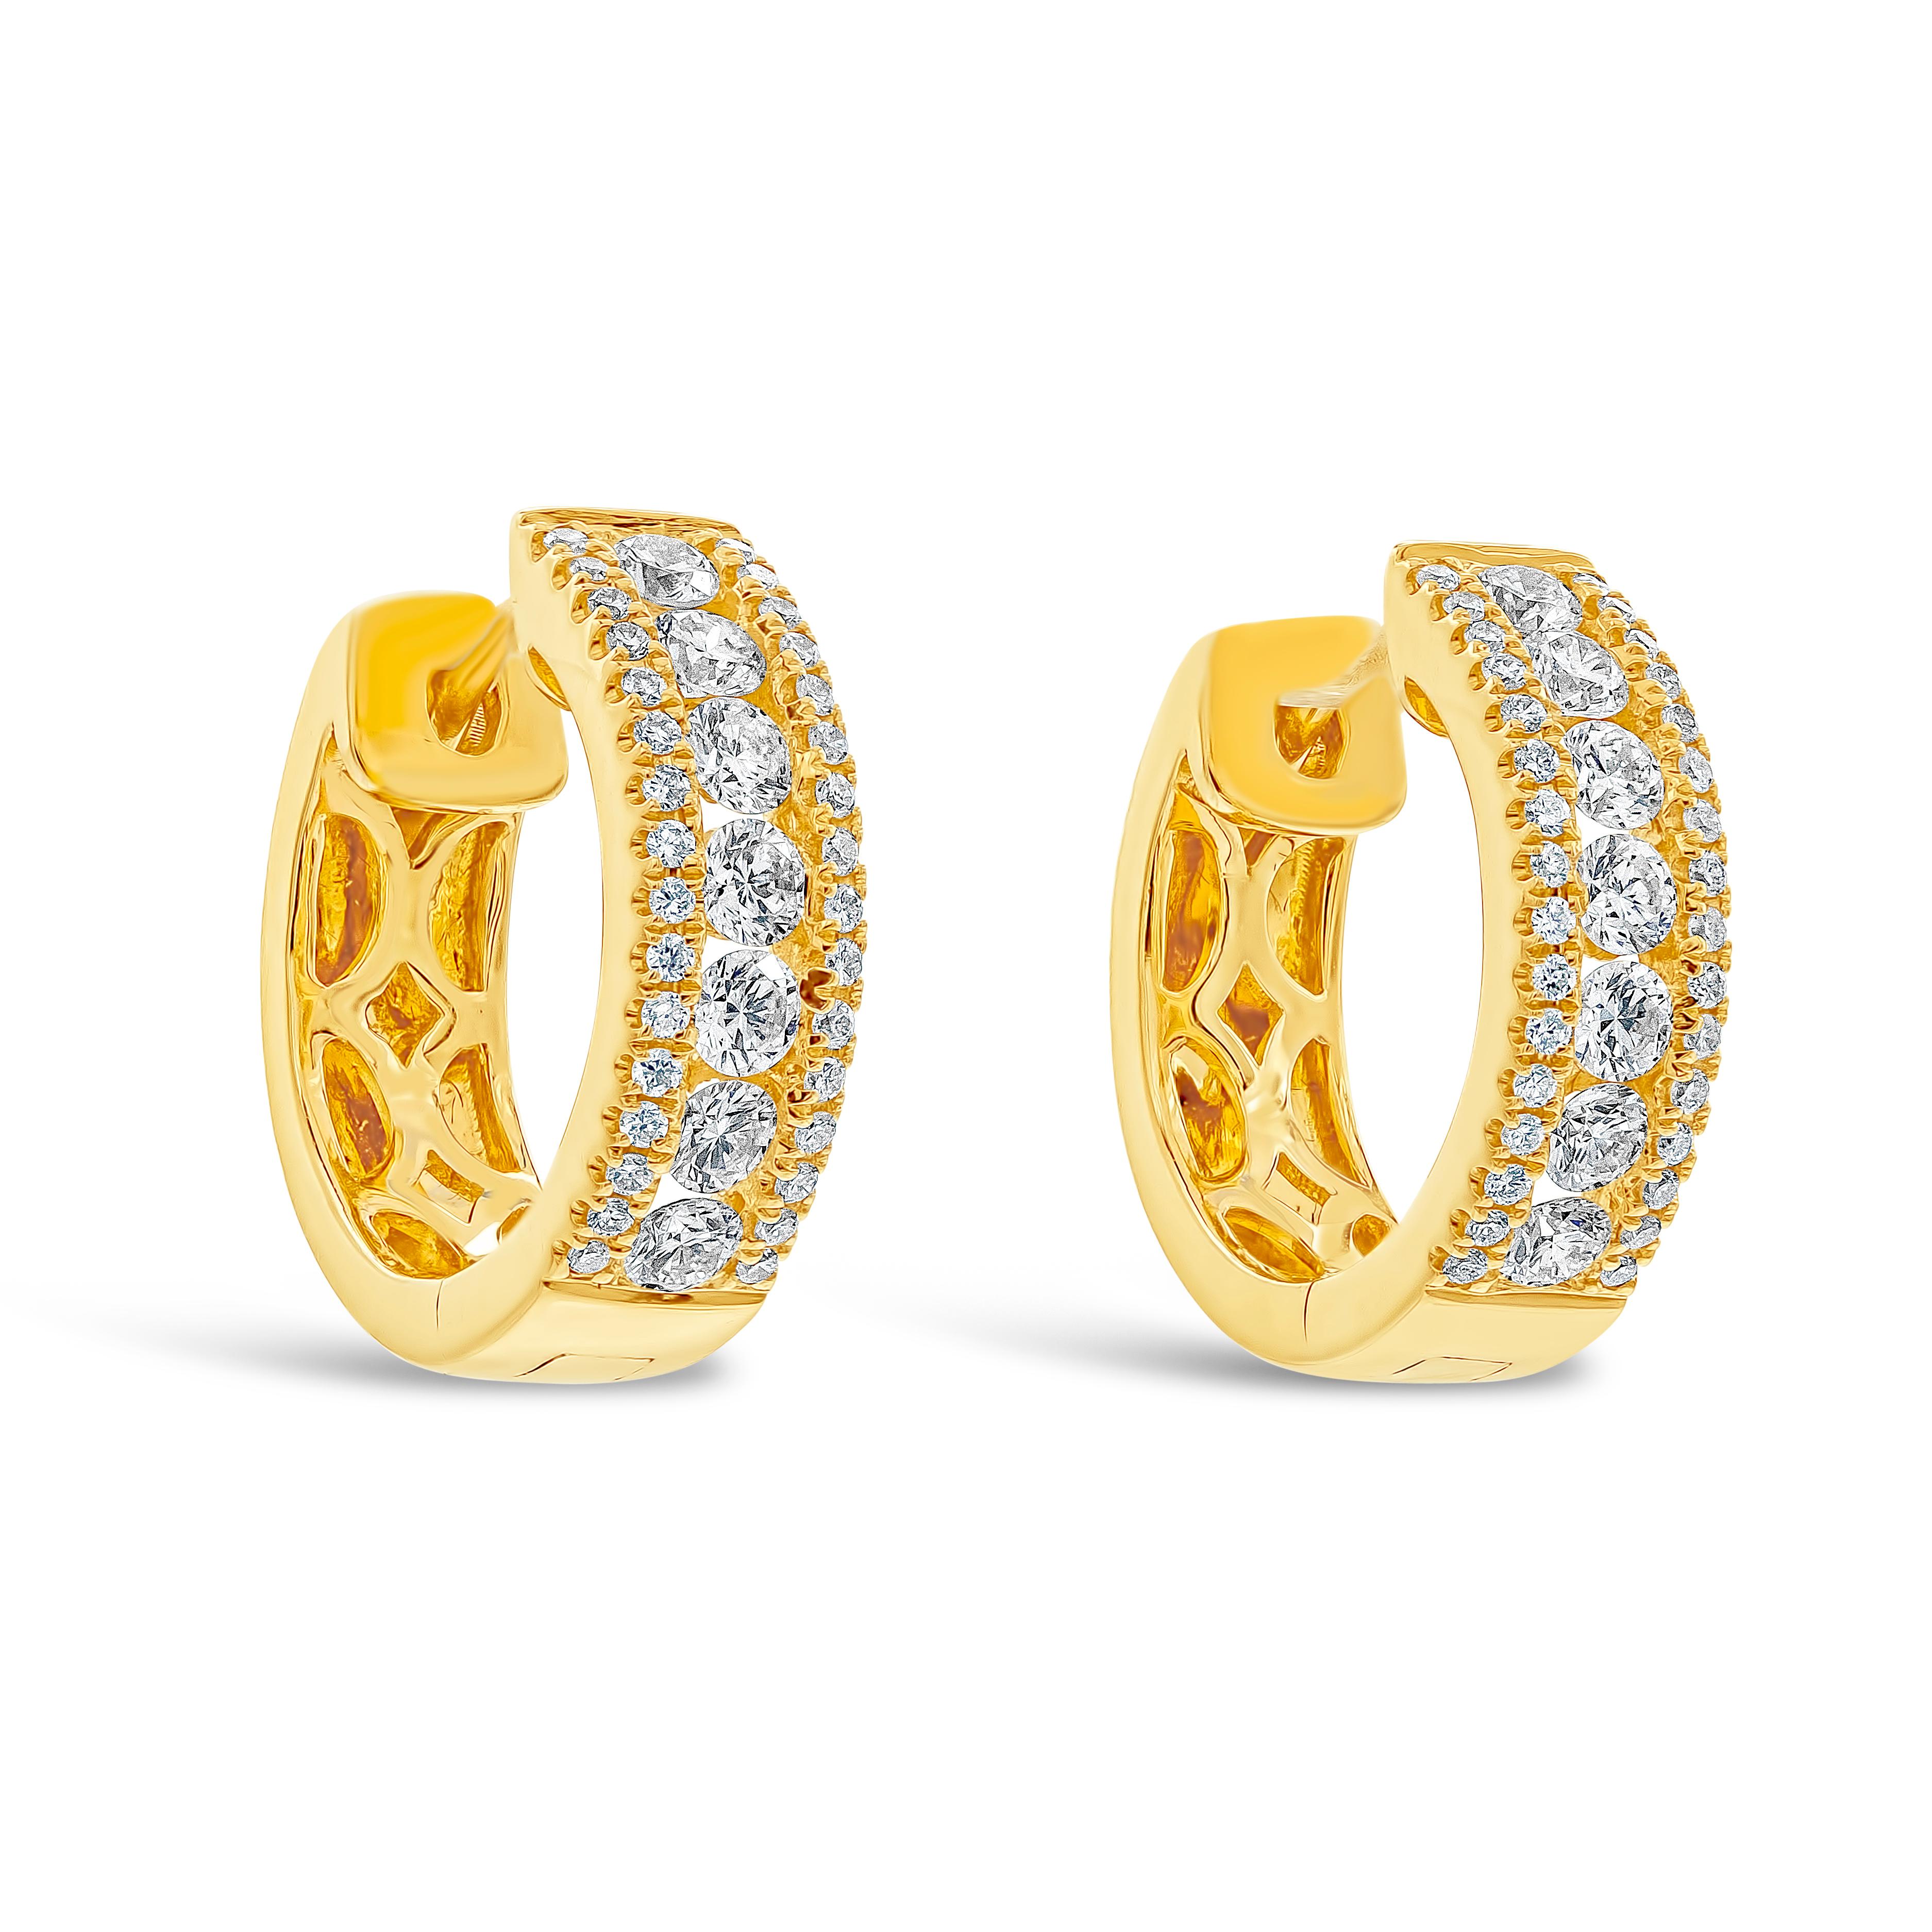 A simple pair of hoop earrings showcasing a row of round brilliant diamonds, set in-between round melee diamonds. Made in 18k yellow gold. Diamonds weigh 0.61 carats total. 

Roman Malakov is a custom house, specializing in creating anything you can